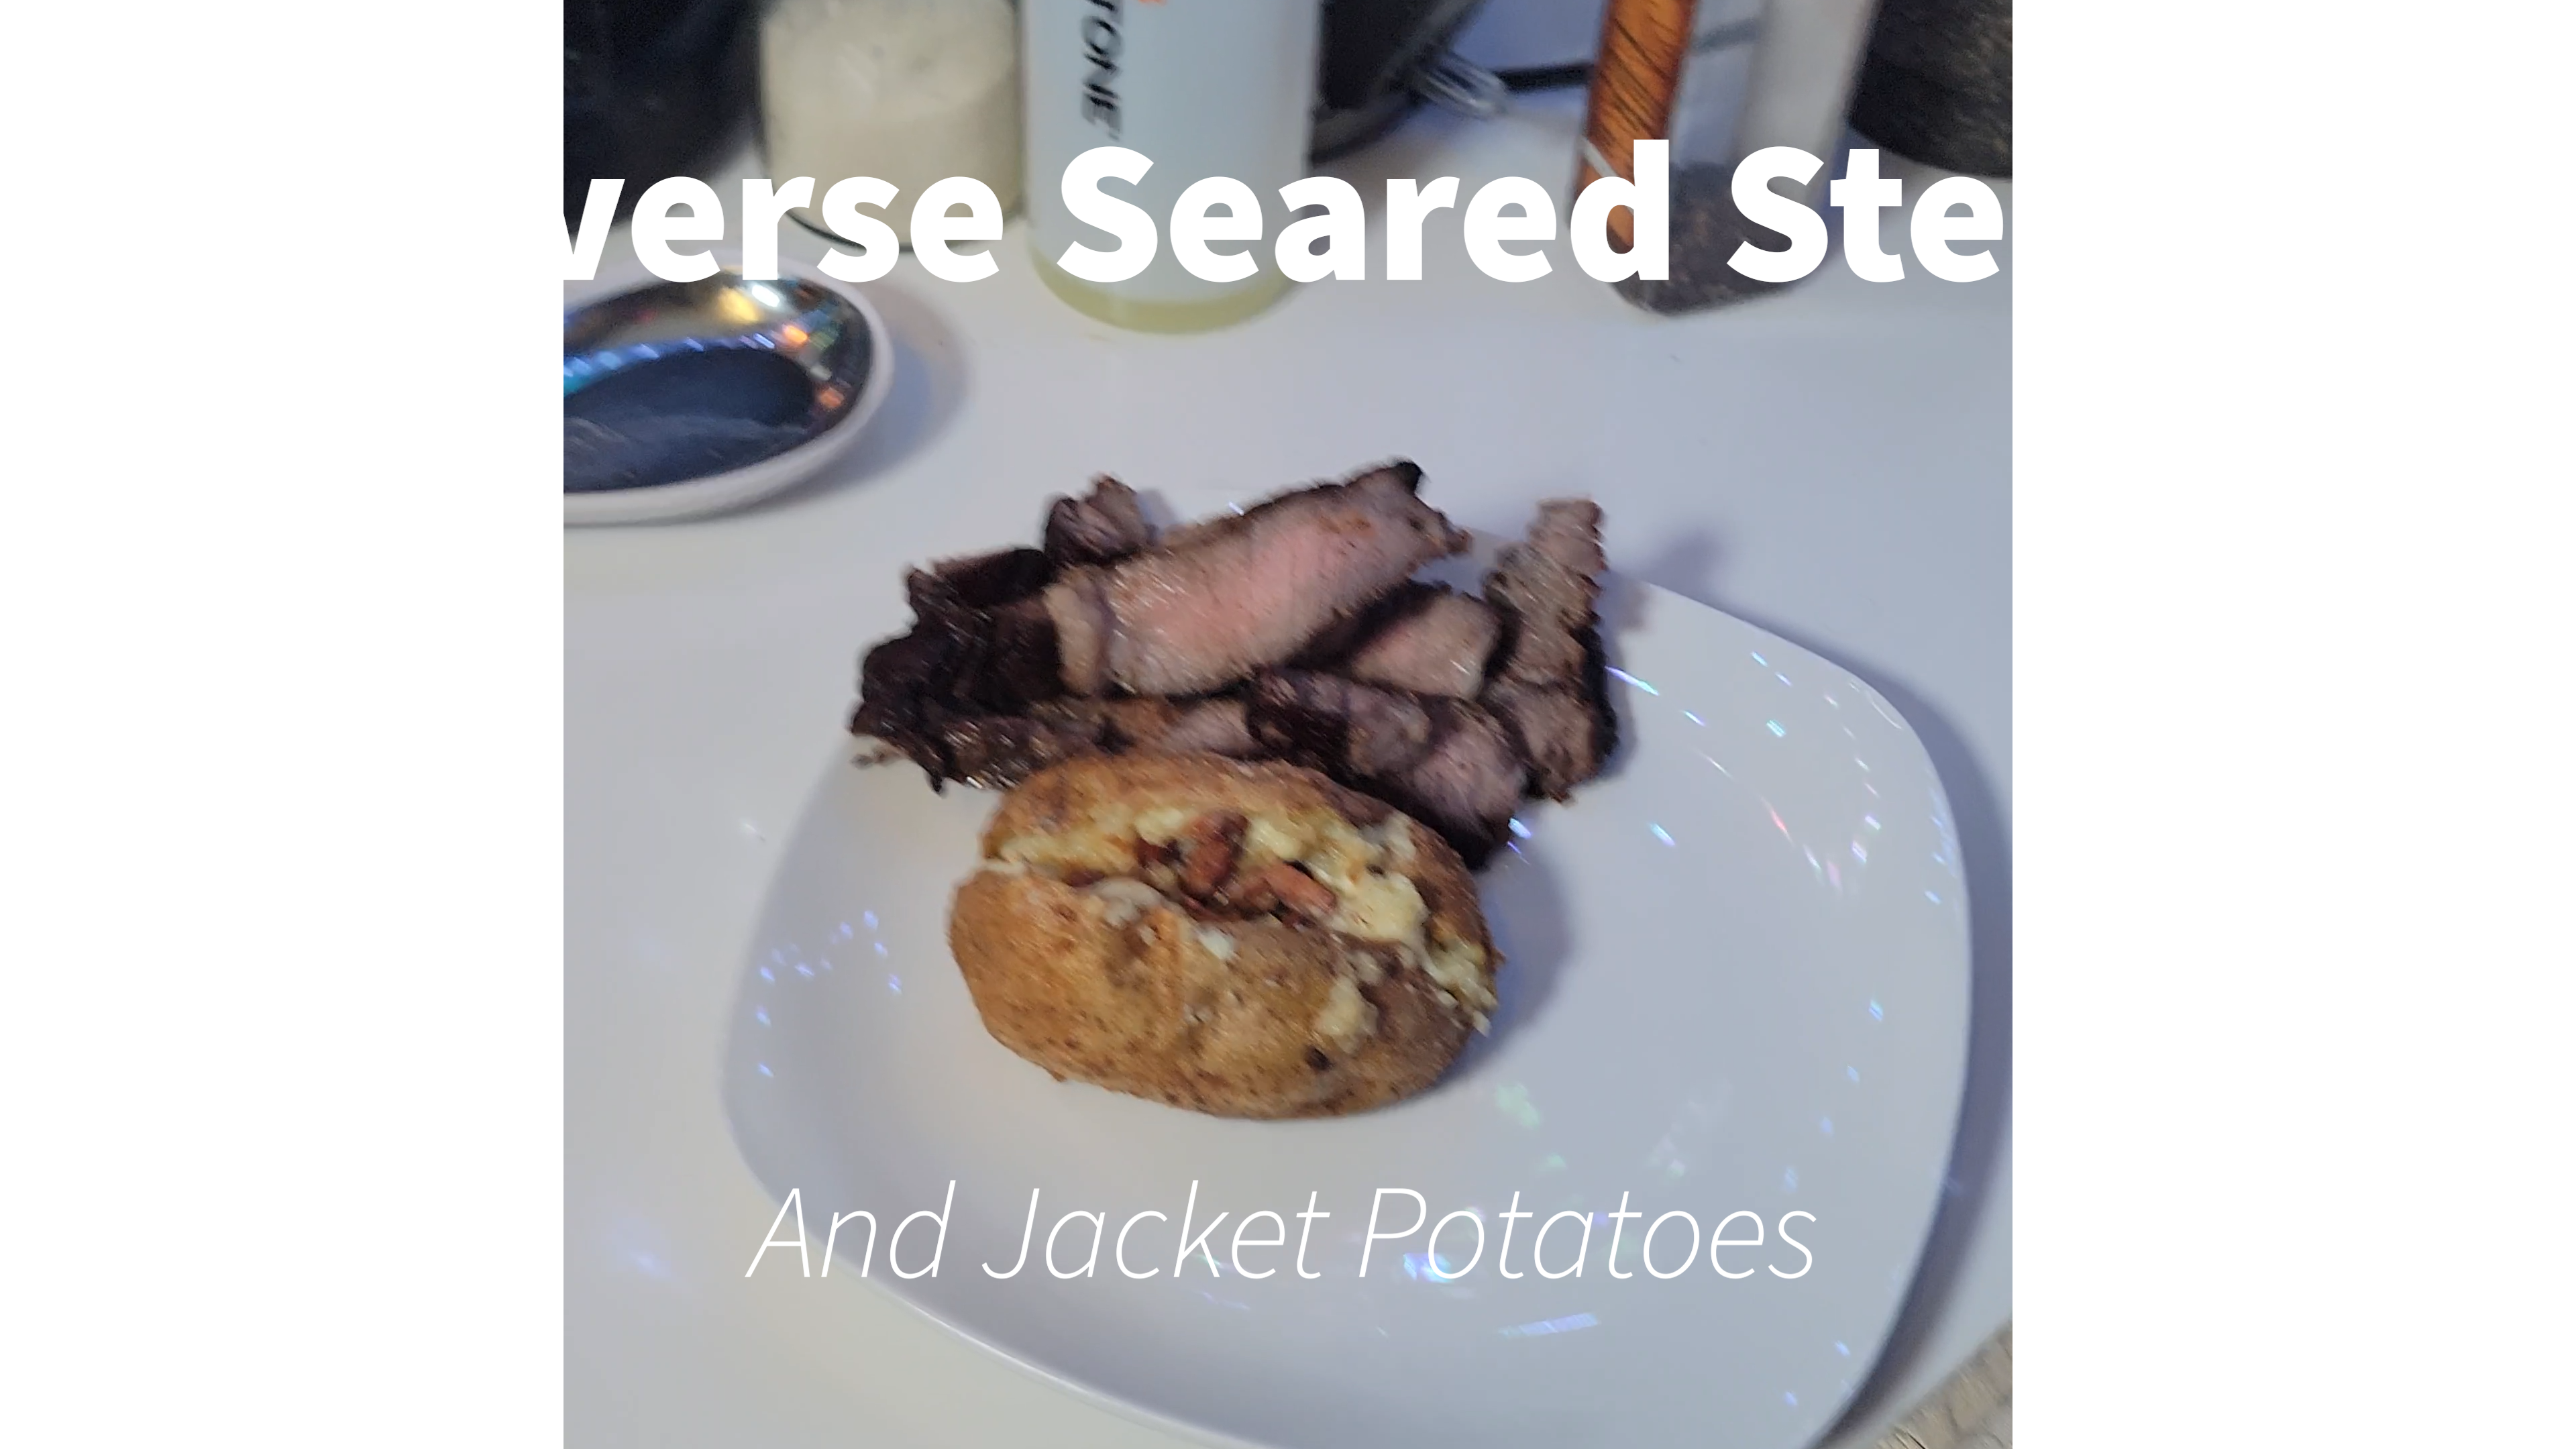 Syn Cafe: Reverse Seared Steak and Jacket Potatoes